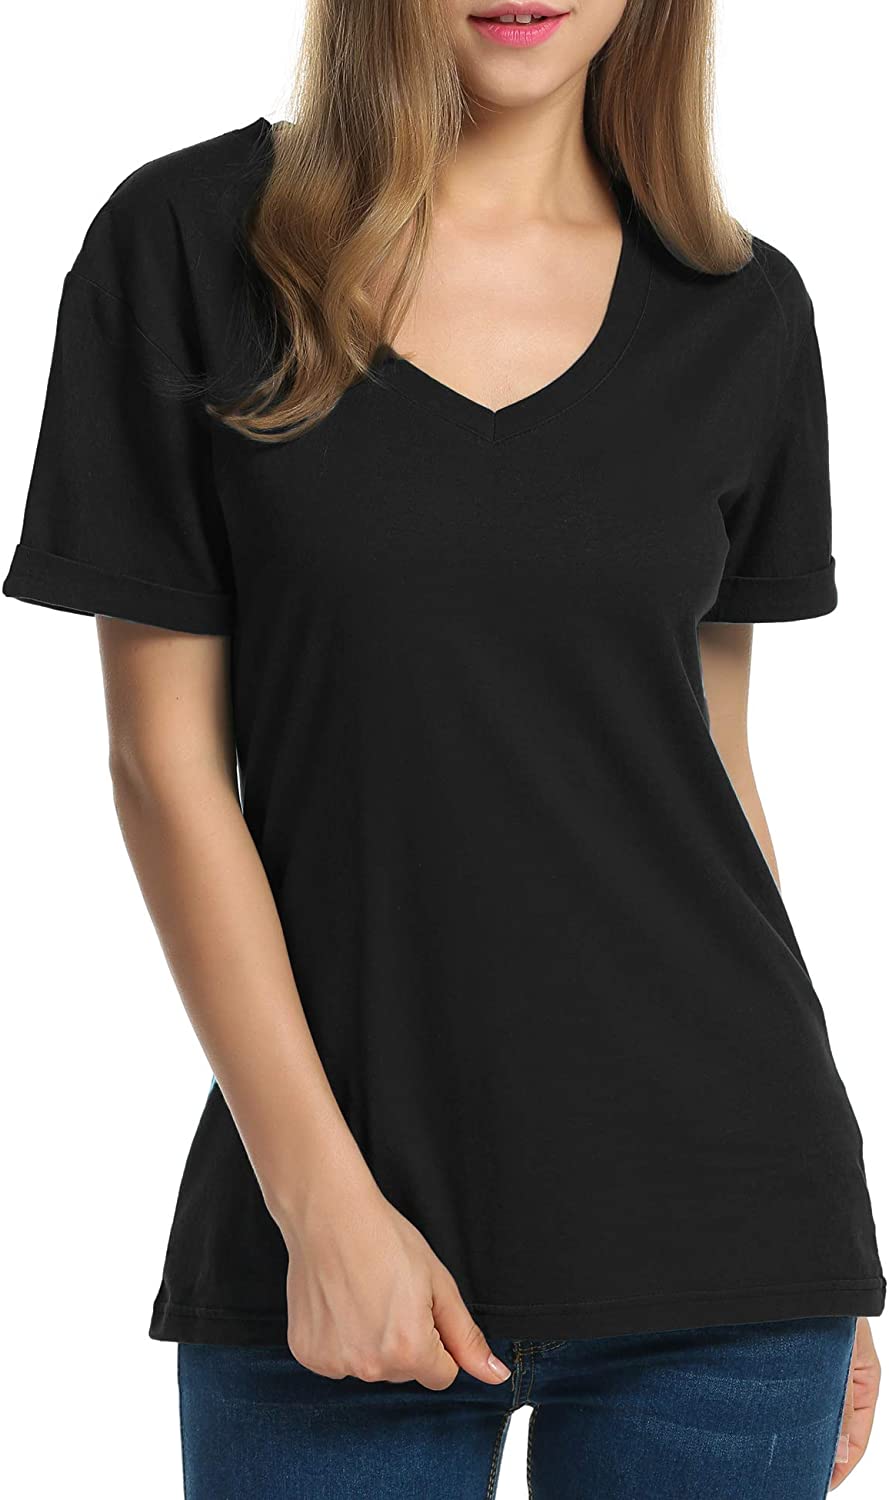 Meaneor Women's V-Neck Shirts Short Sleeve Loose Casual, #1 Black, Size ...